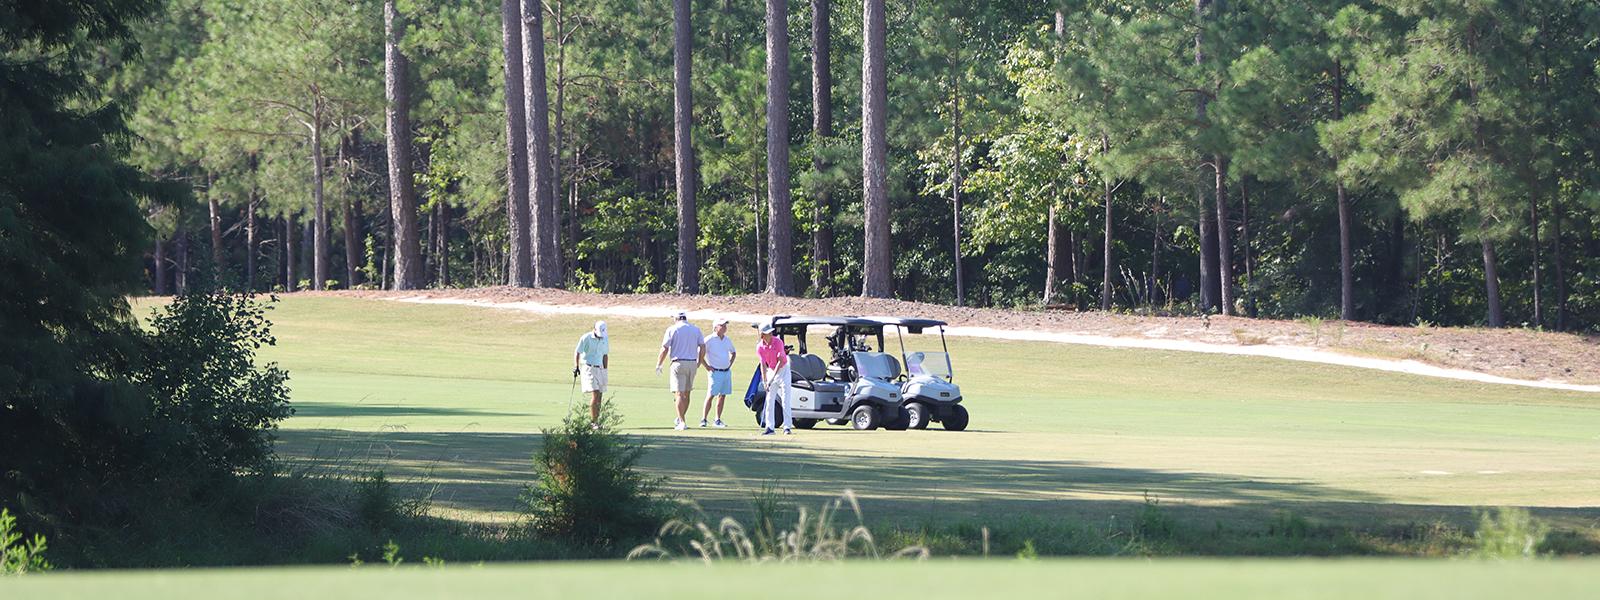 The CIU Golf Classic was played at the beautiful Columbia Country Club. (Photos by Kierston Smith)